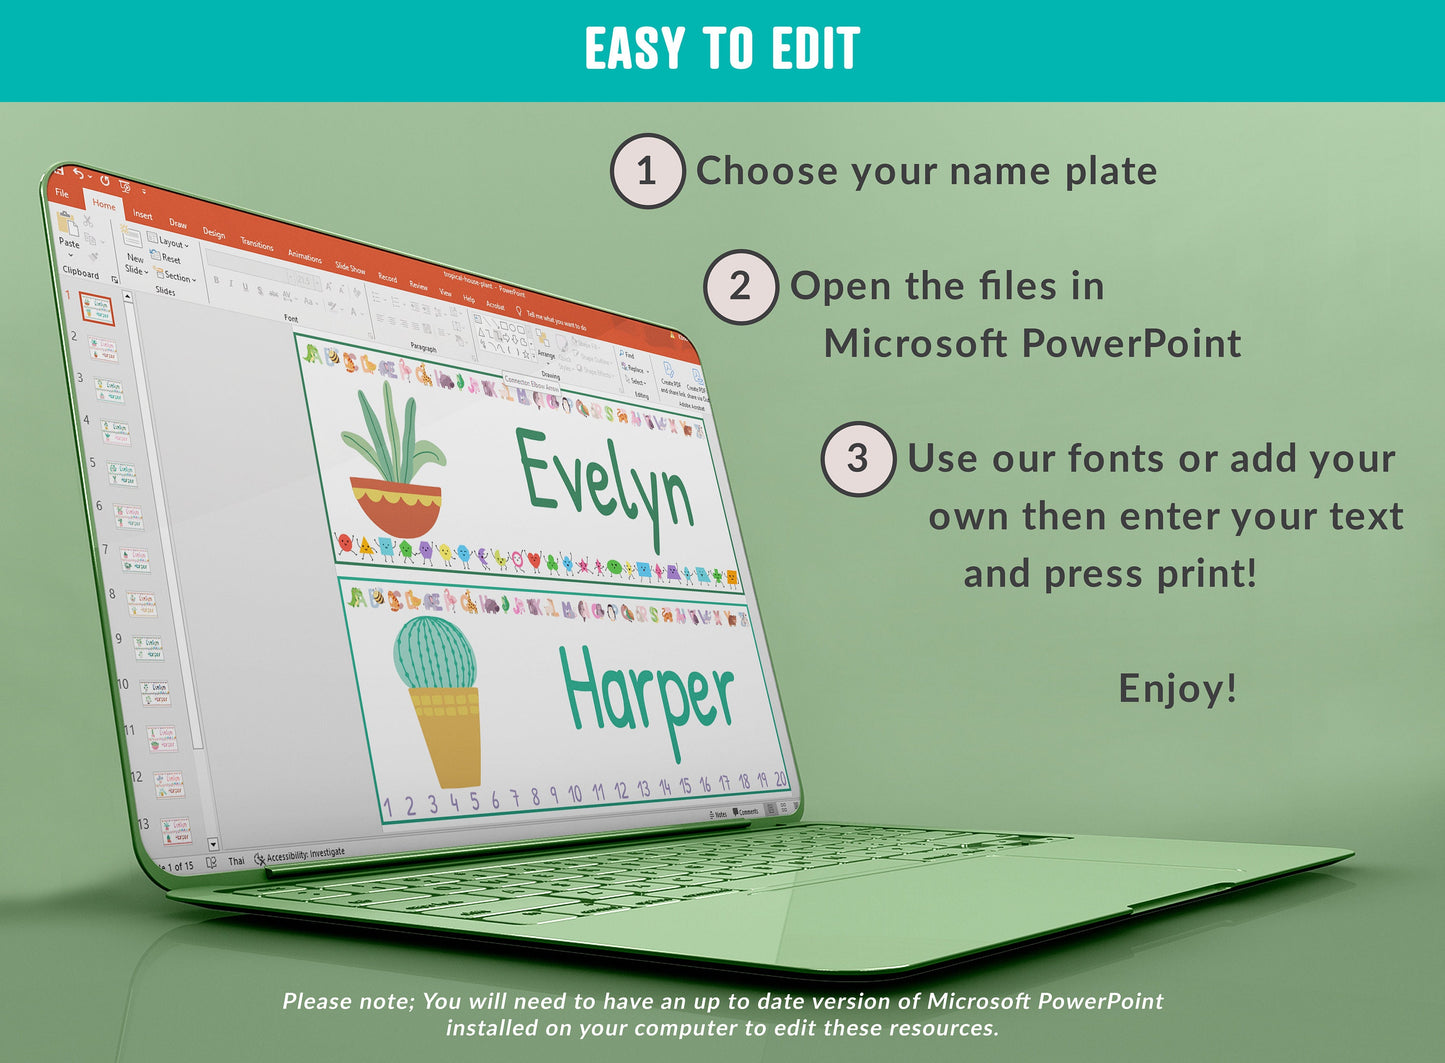 Tropical House Plant Student Desk Plates: 30 Editable Designs with PowerPoint, US Letter Size, Instant Download